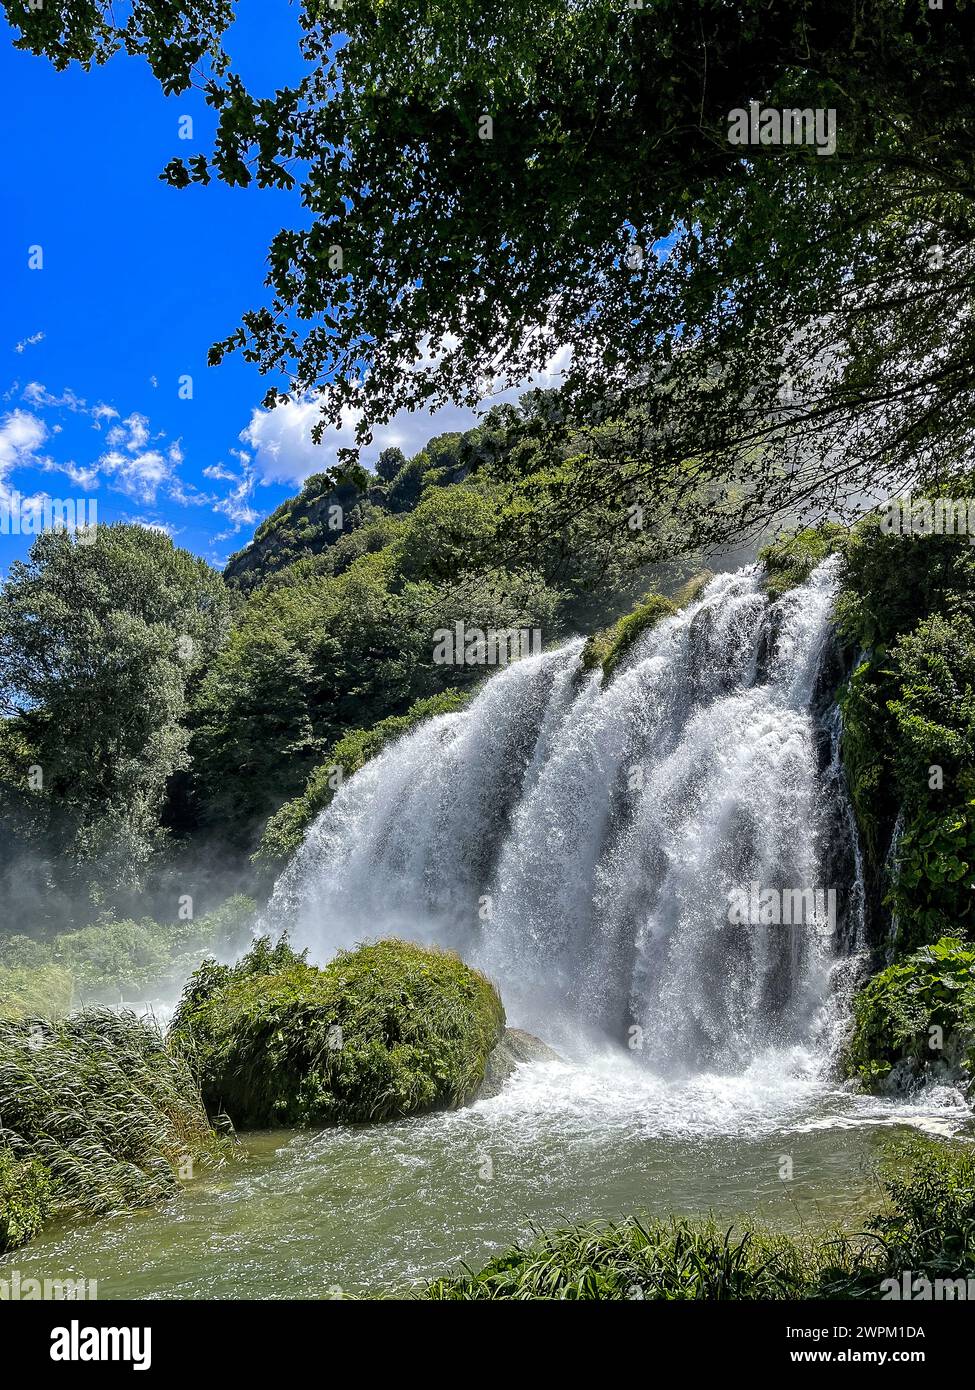 Cascata delle Marmore Cascata delle Marmore, Ombrie, Italie, Europe Banque D'Images